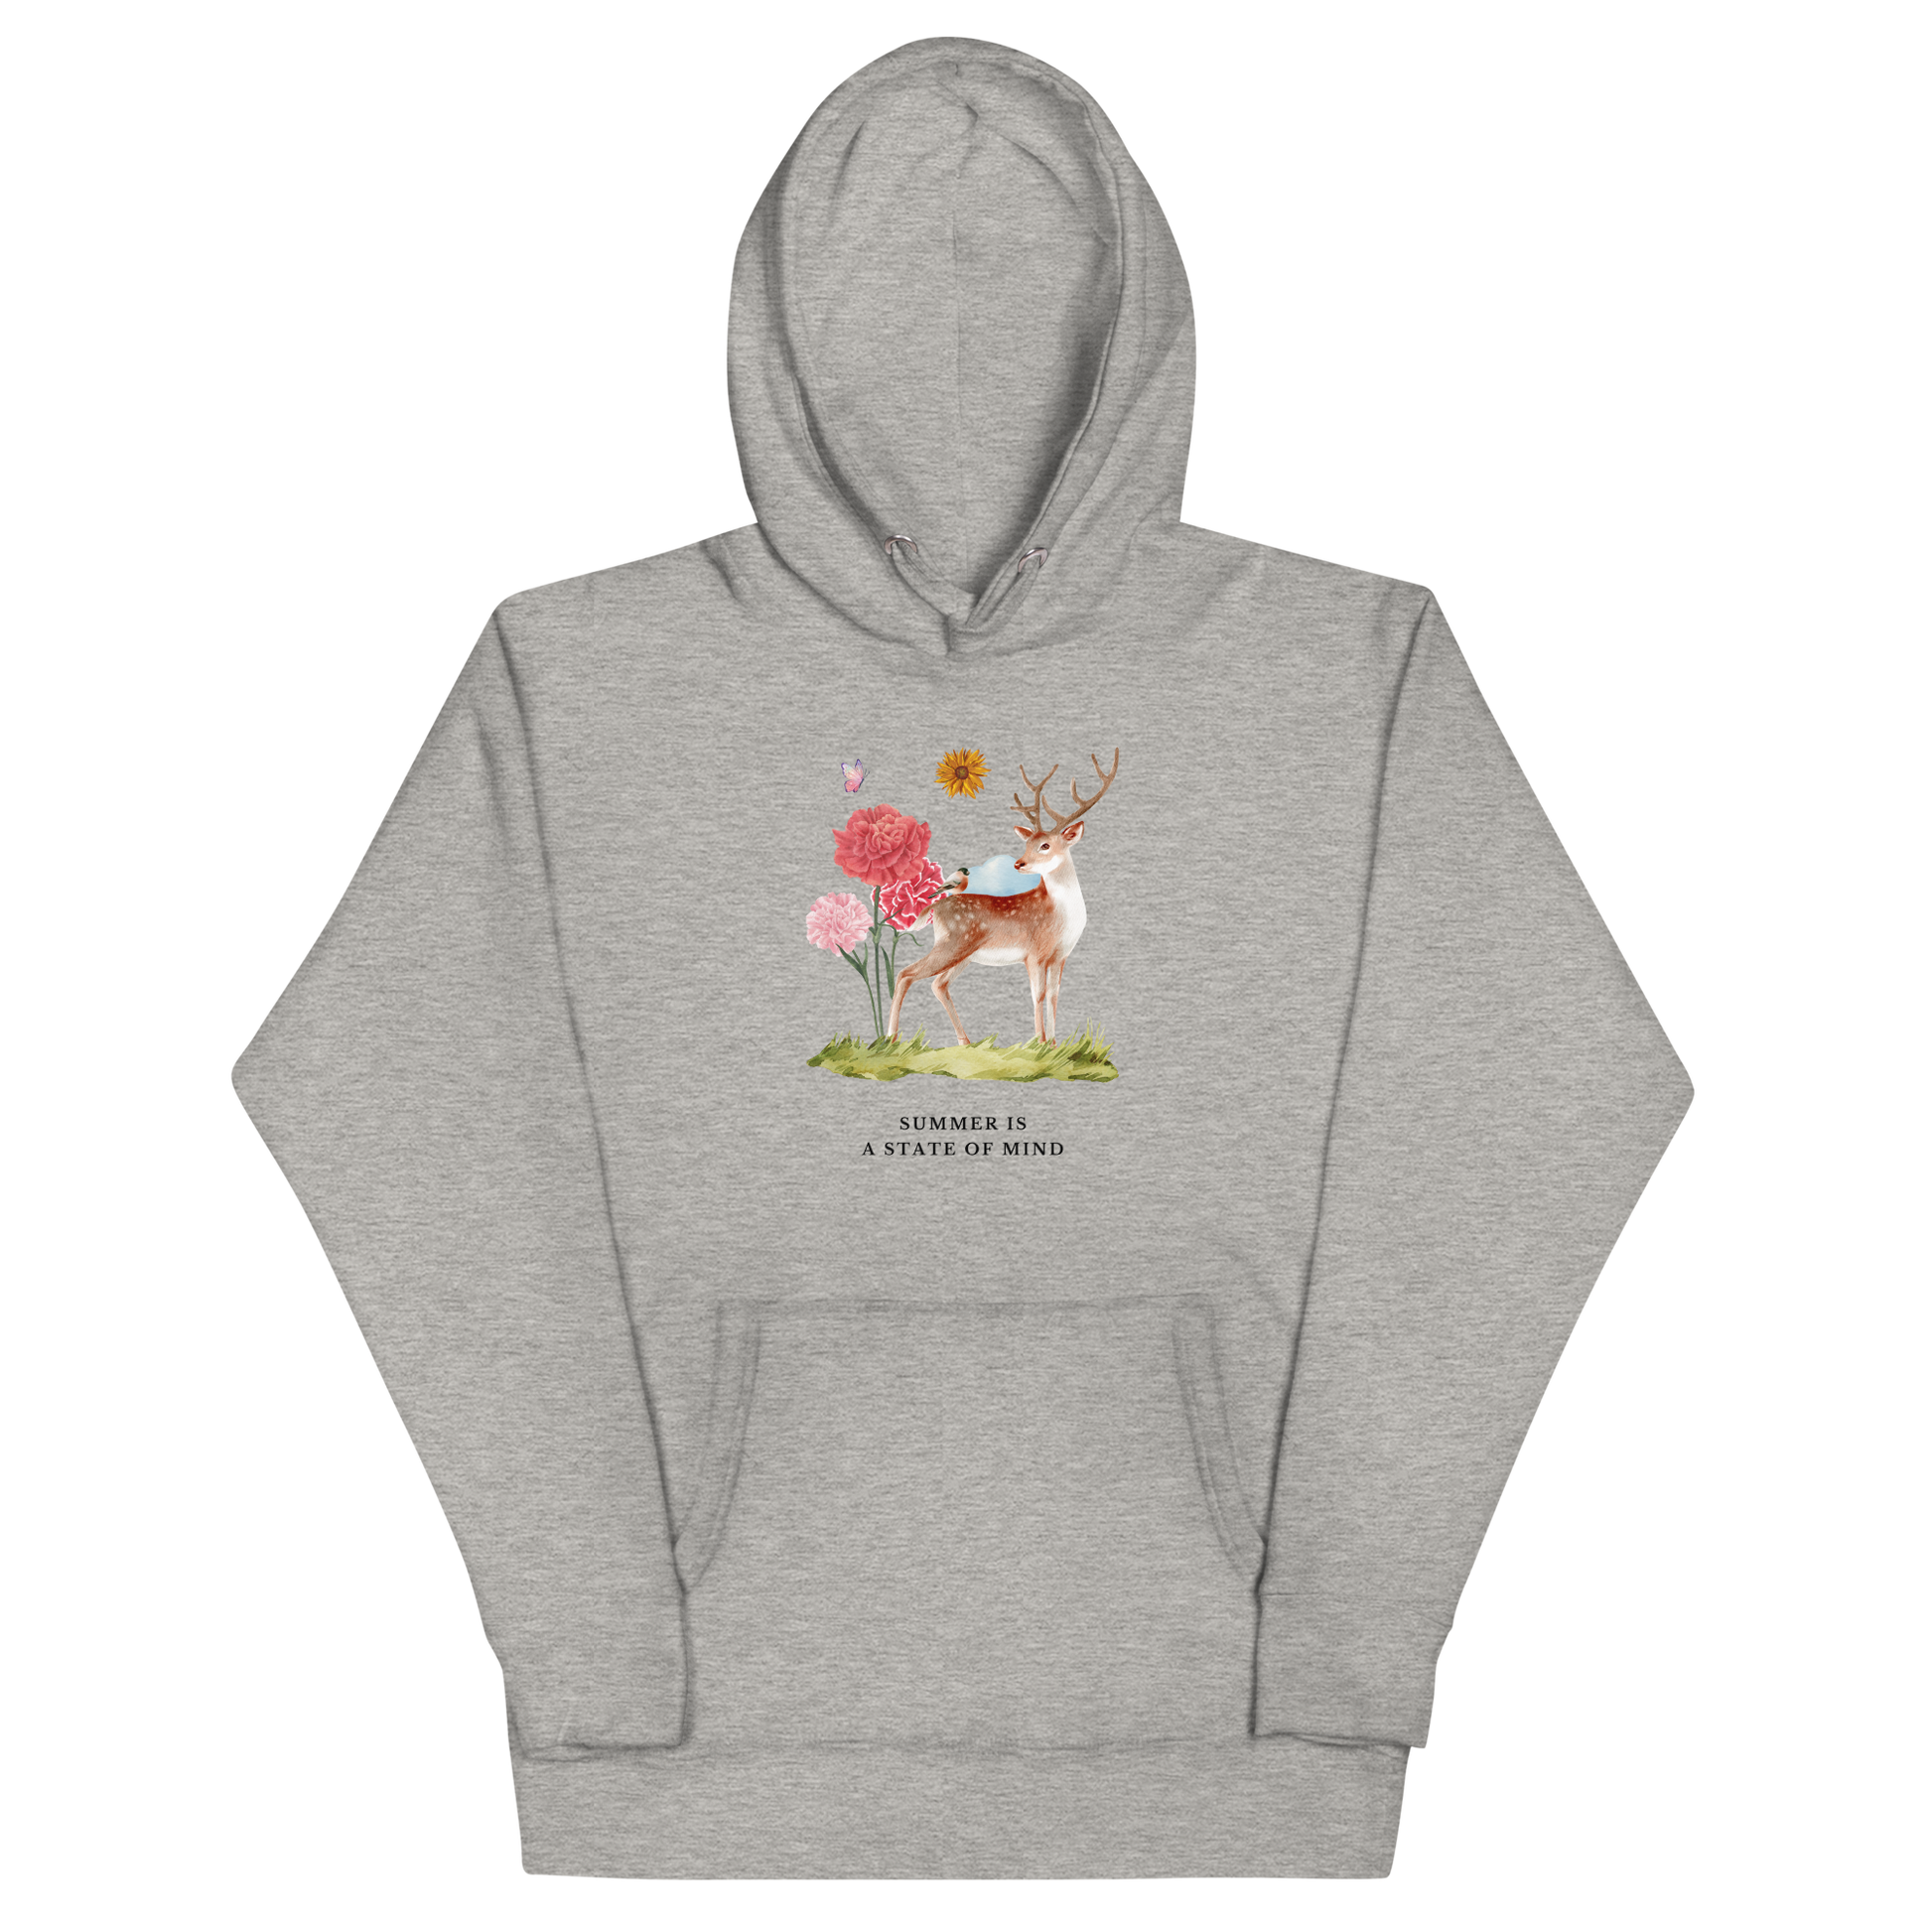 Carbon Grey Premium Summer Is a State of Mind Hoodie showcasing a Summer Is a State of Mind graphic on the chest - Cute Graphic Summer Hoodies - Boozy Fox